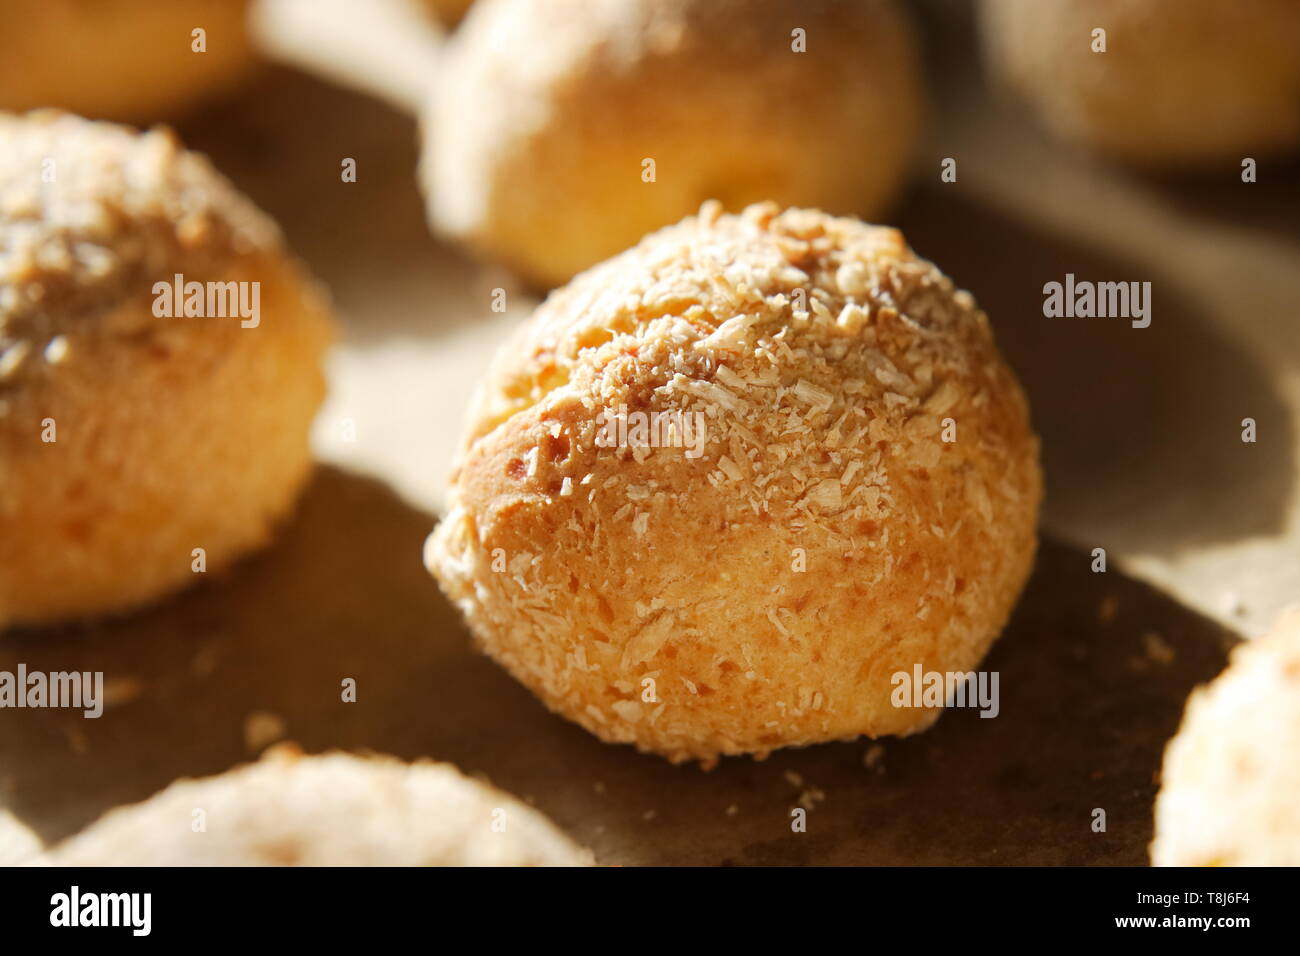 Close-up of a baked bun with side solar lighting. Fresh cottage cheese bread for healthy eating at home recipe. Stock Photo